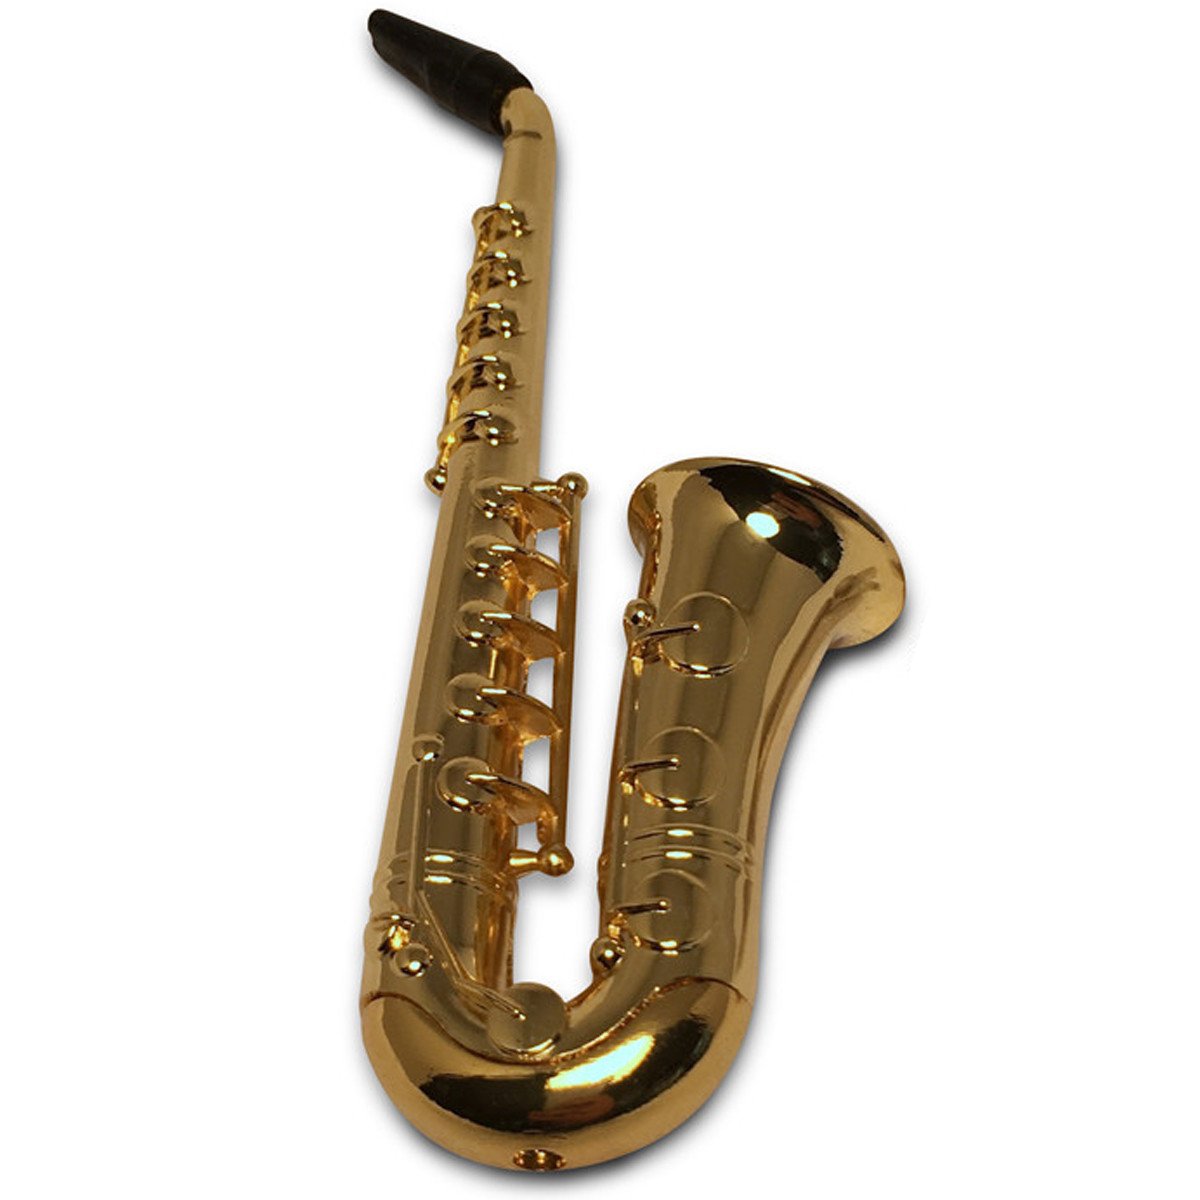 Look Like Your Playing The Saxophone